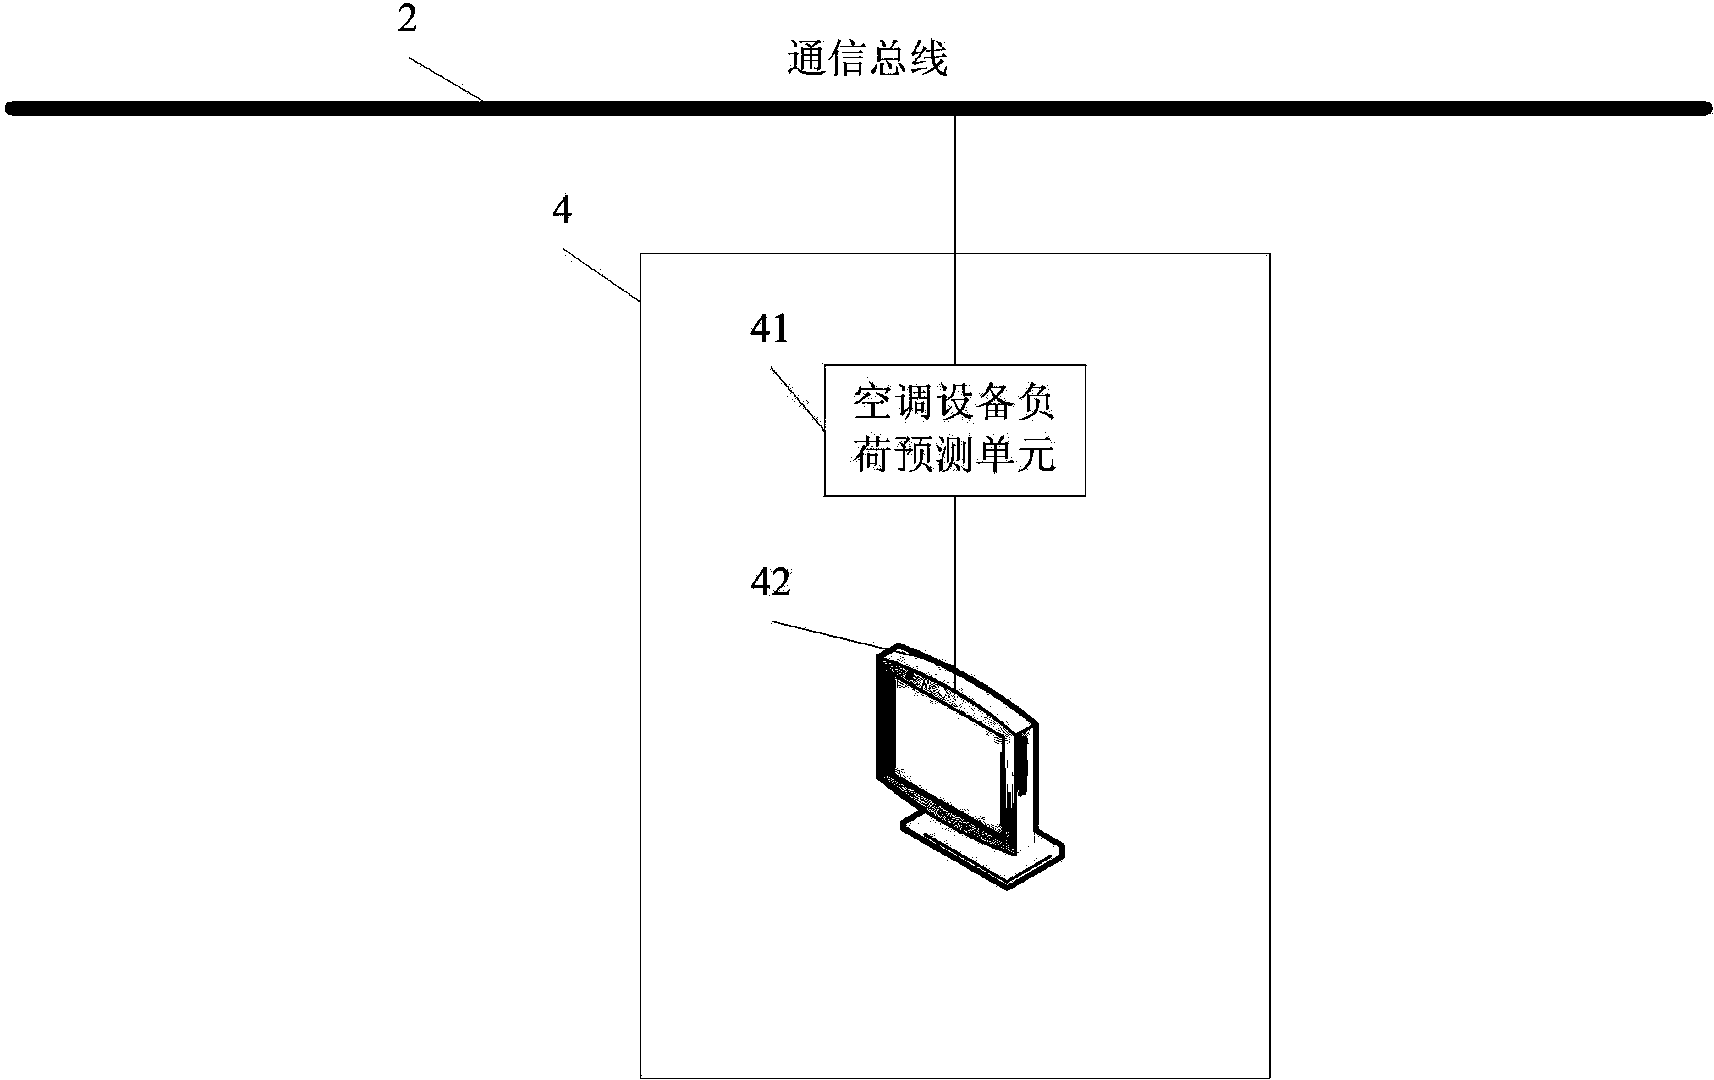 Load predication method of building air-conditioning equipment